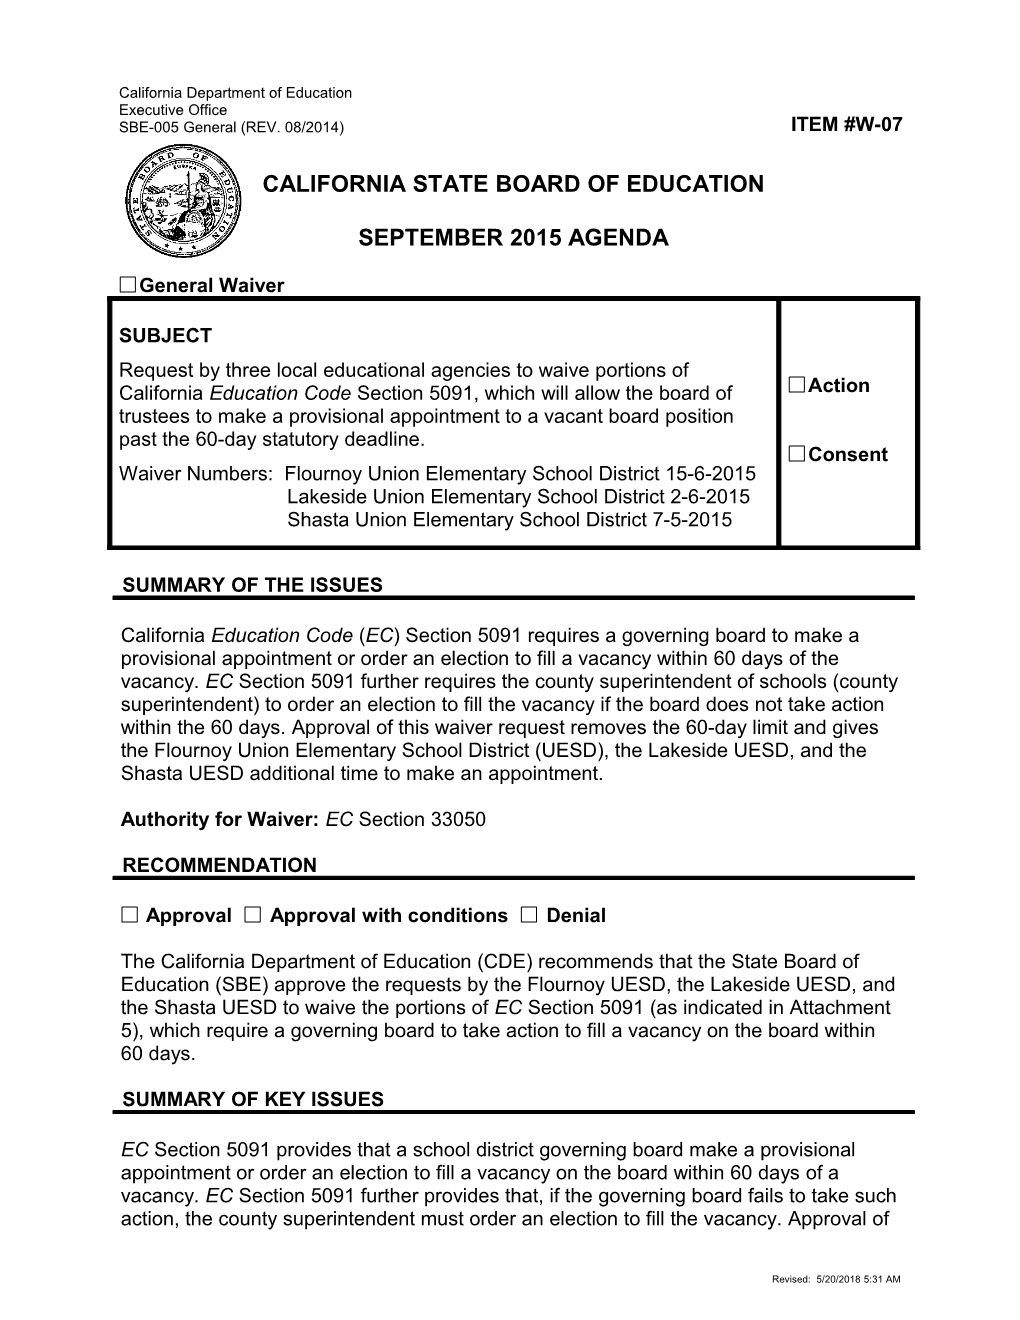 September 2015 Waiver Item W-07 - Meeting Agendas (CA State Board of Education)